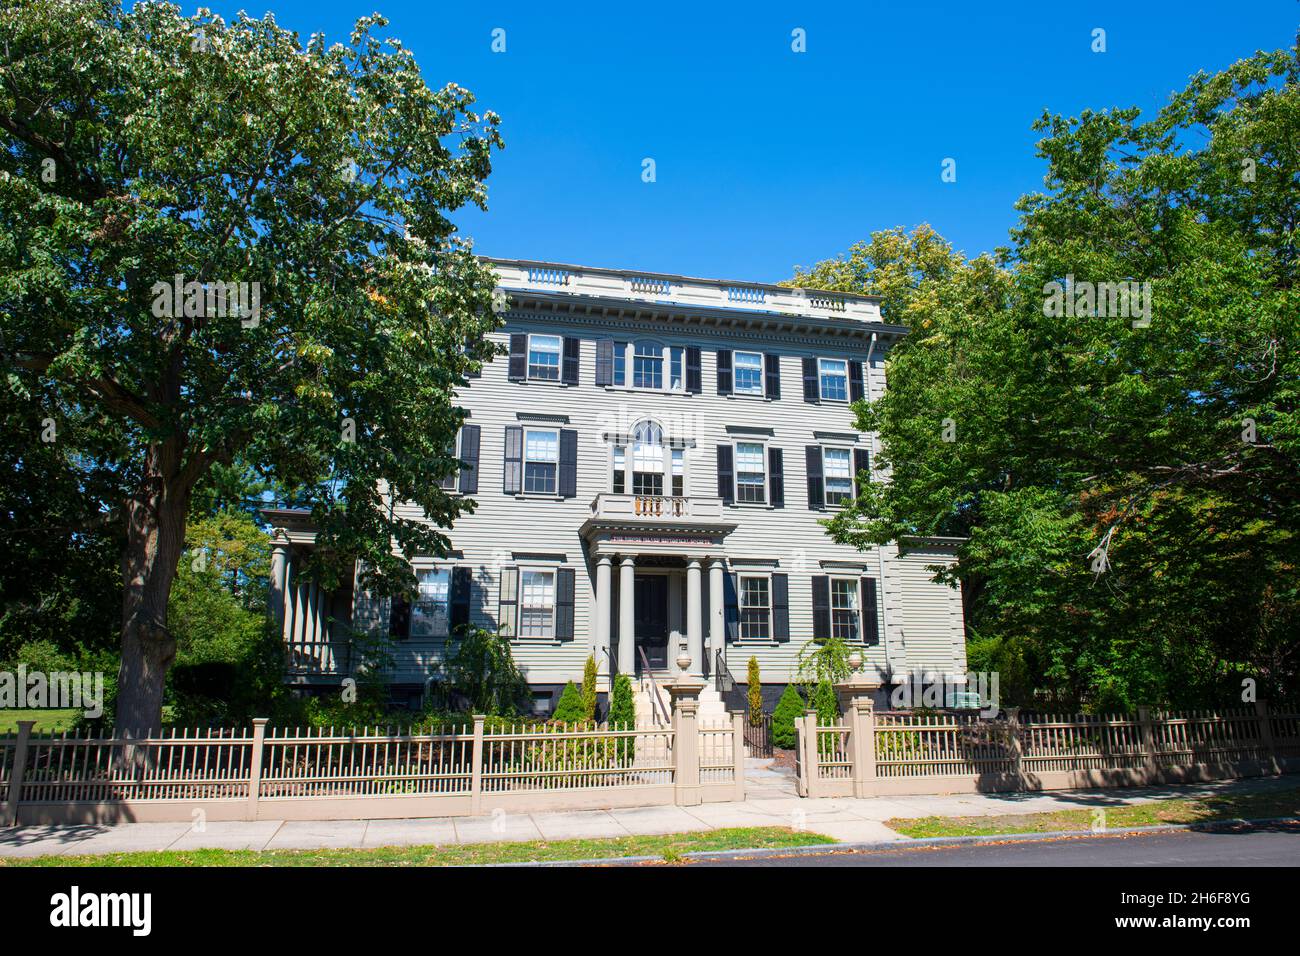 Nelson W. Aldrich House aka De. S. B. Tobey House is a Federal style house at 110 Benevolent Street, Providence, Rhode Island RI, USA. Now this buildi Stock Photo